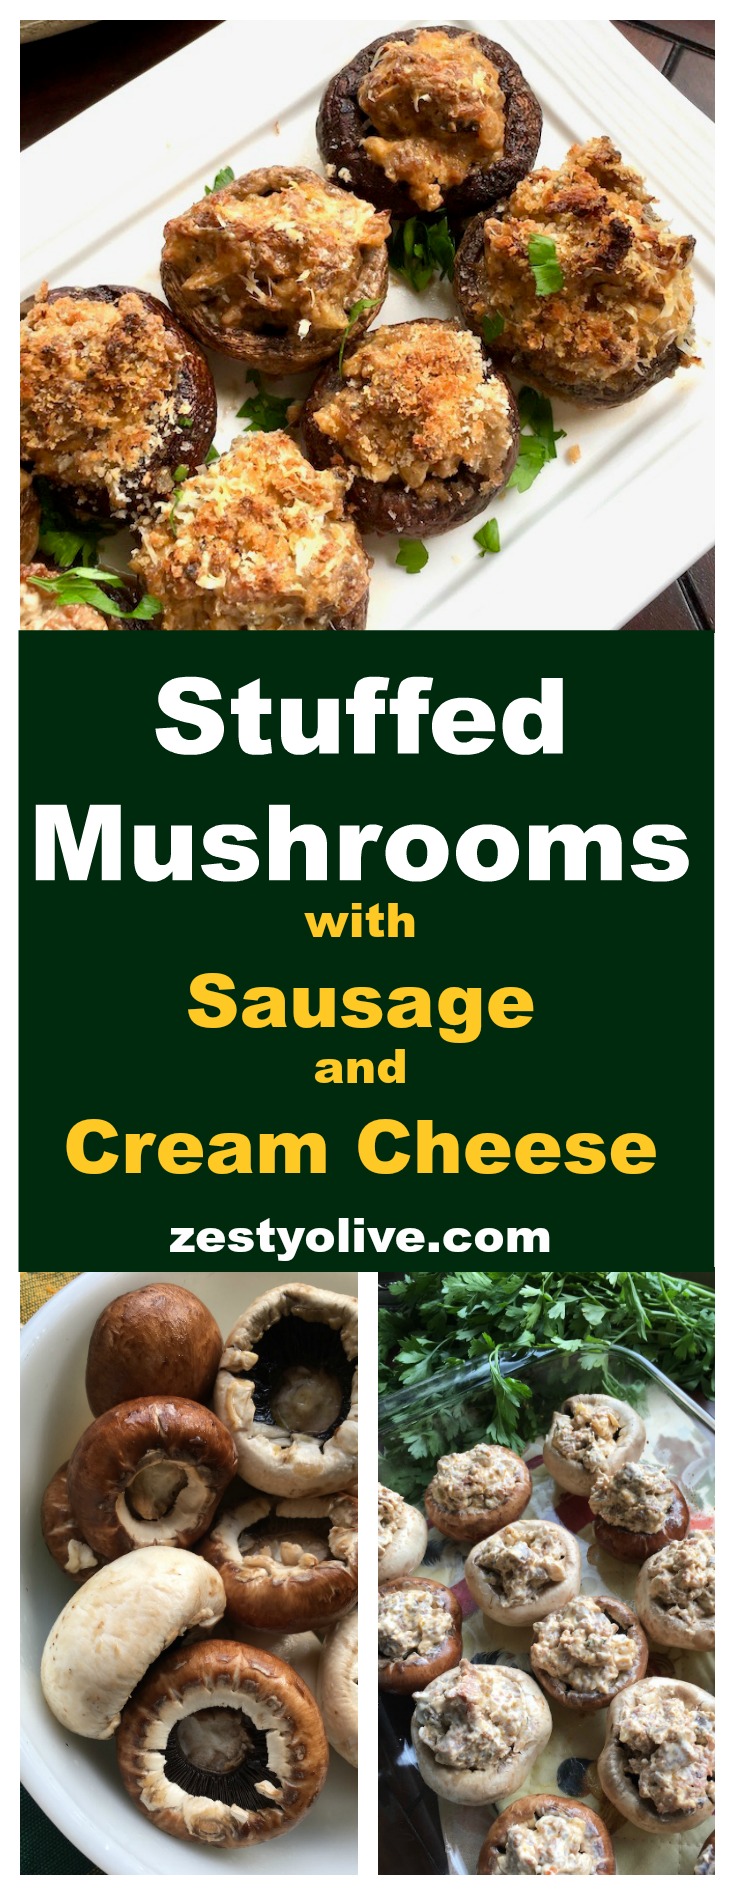 These Stuffed Mushrooms with Sausage and Cream Cheese are a zesty appetizer to serve when entertaining. They are easy to make and your guests will love them! #recipes #mushrooms #sausage #stuffedmushrooms #appetizer